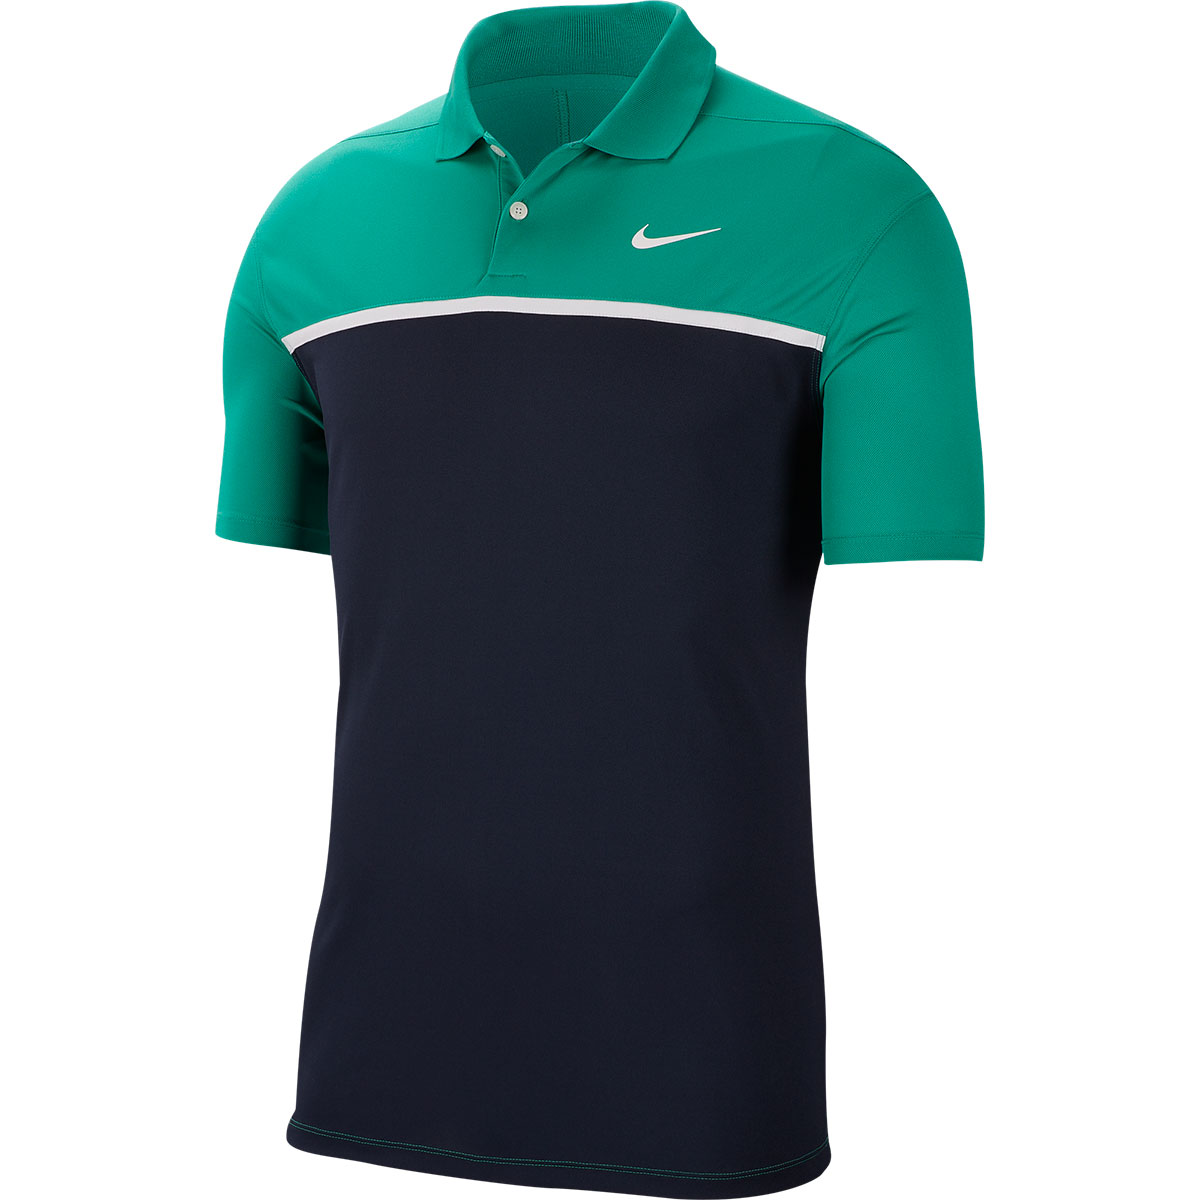 Nike Golf Dri-FIT Victory Colour Block Polo Shirt from american golf